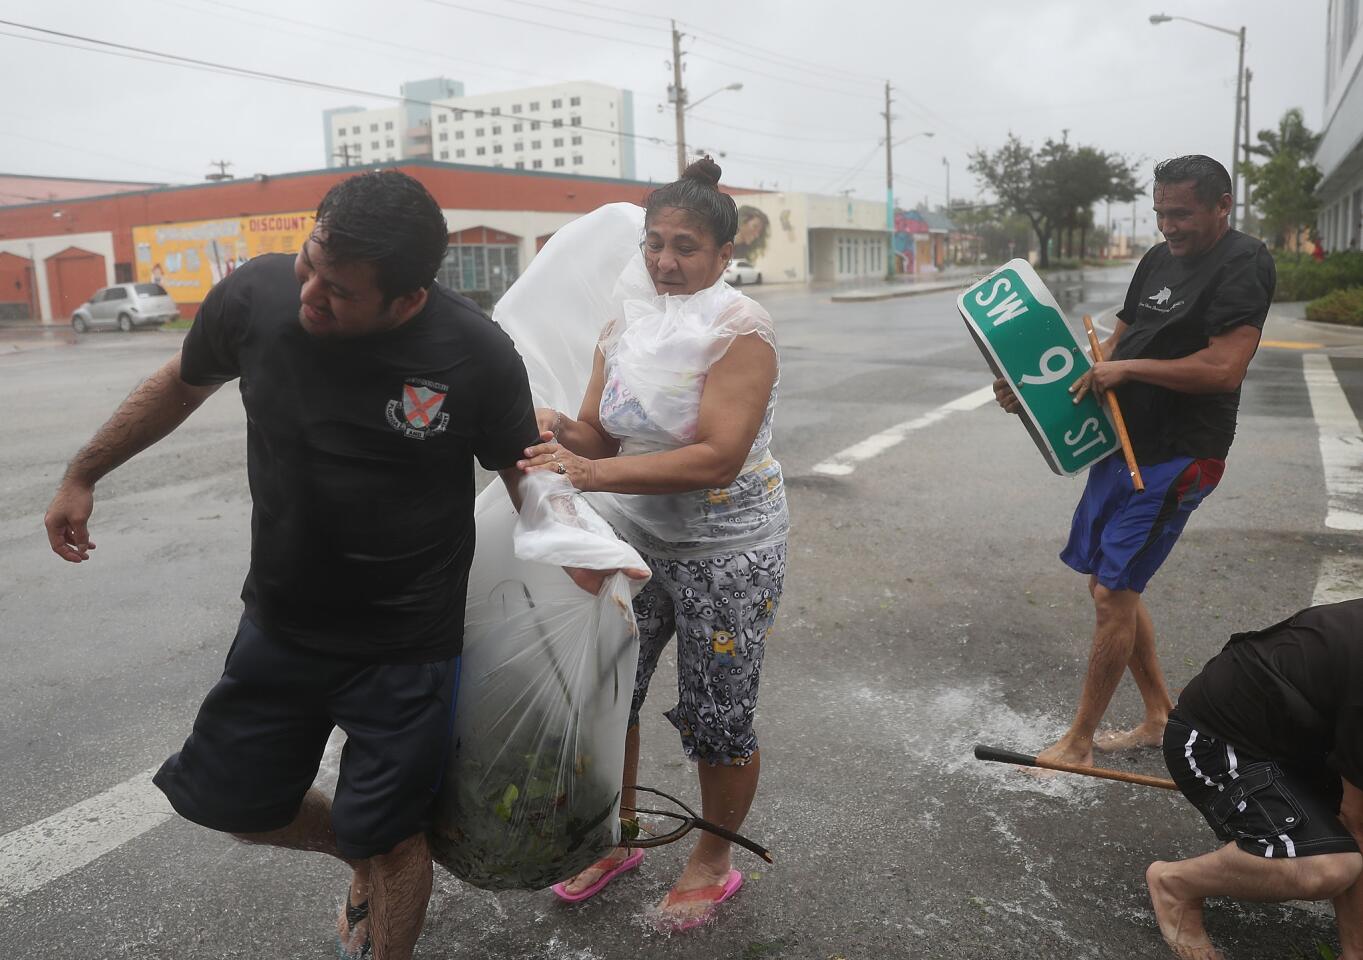 People clear debris out of a drainage ditch to keep the area from flooding as Hurricane Irma passes through Miami on Sept. 10, 2017.